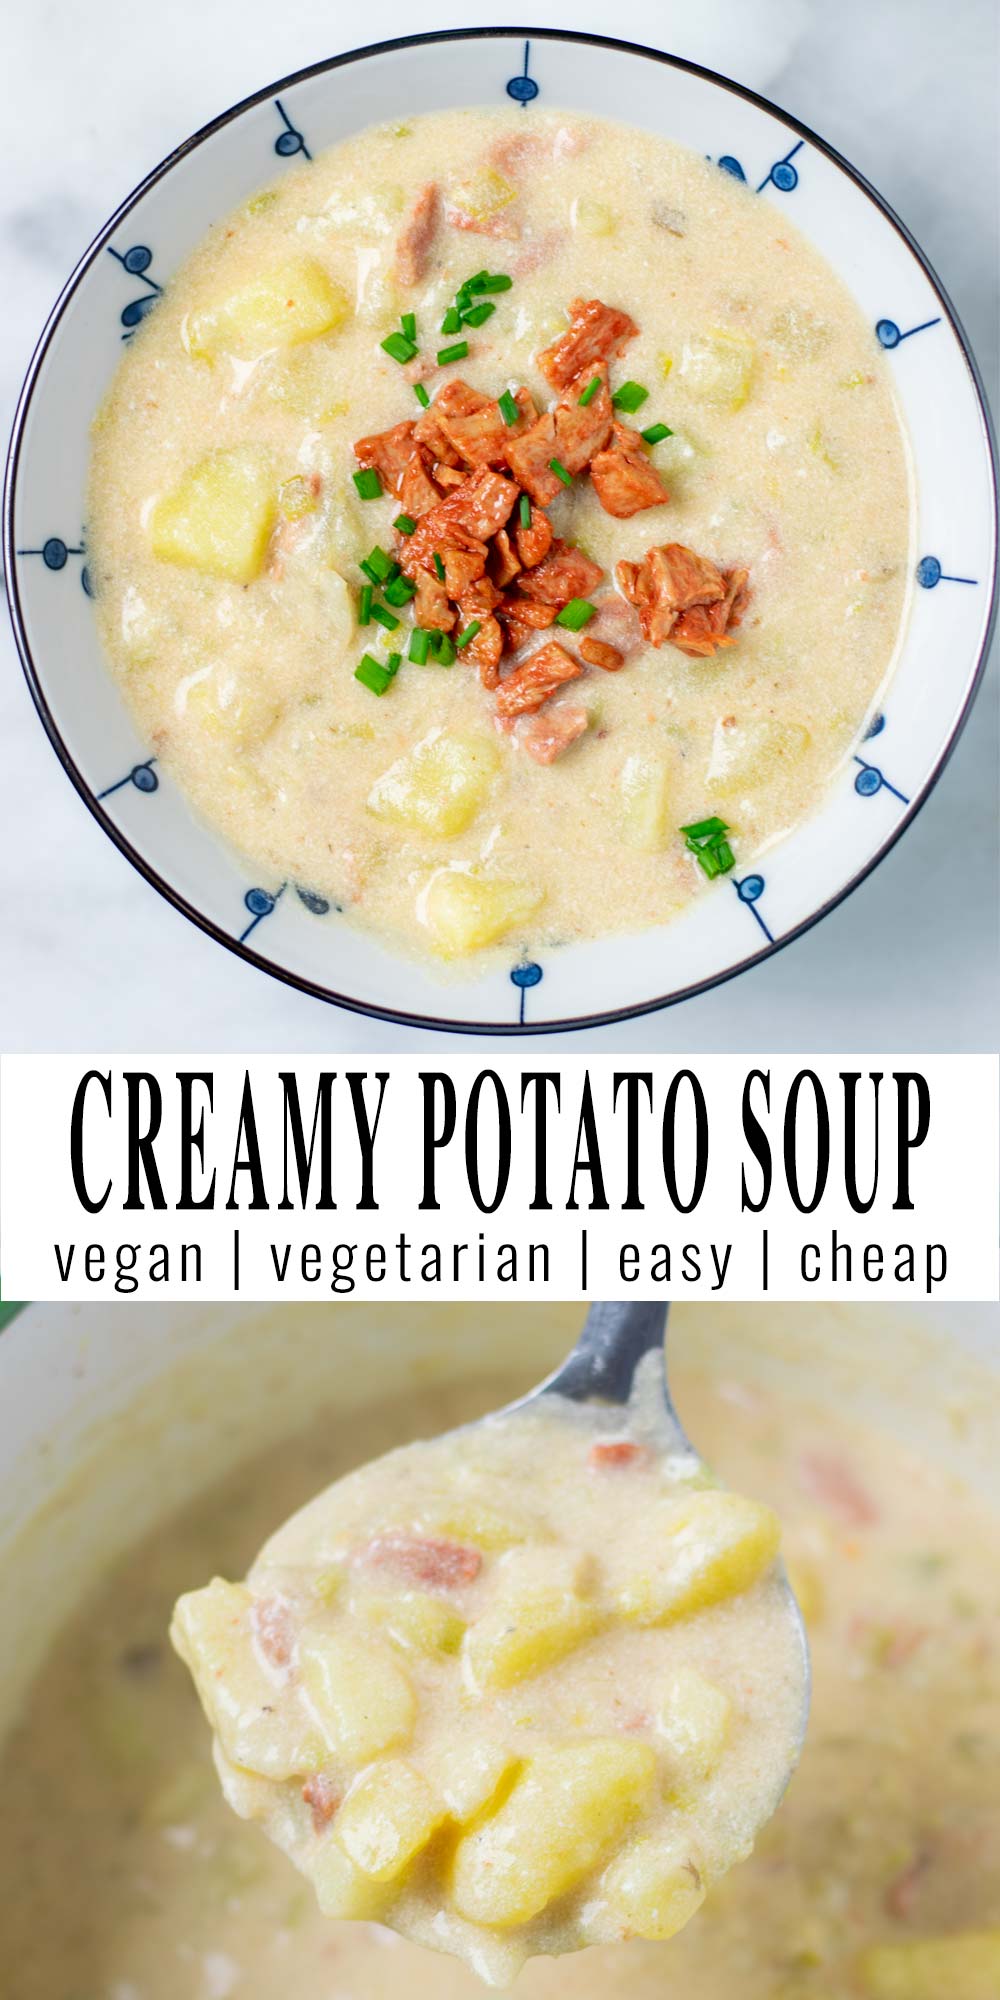 Collage of two pictures of the Creamy Potato Soup with recipe title text.